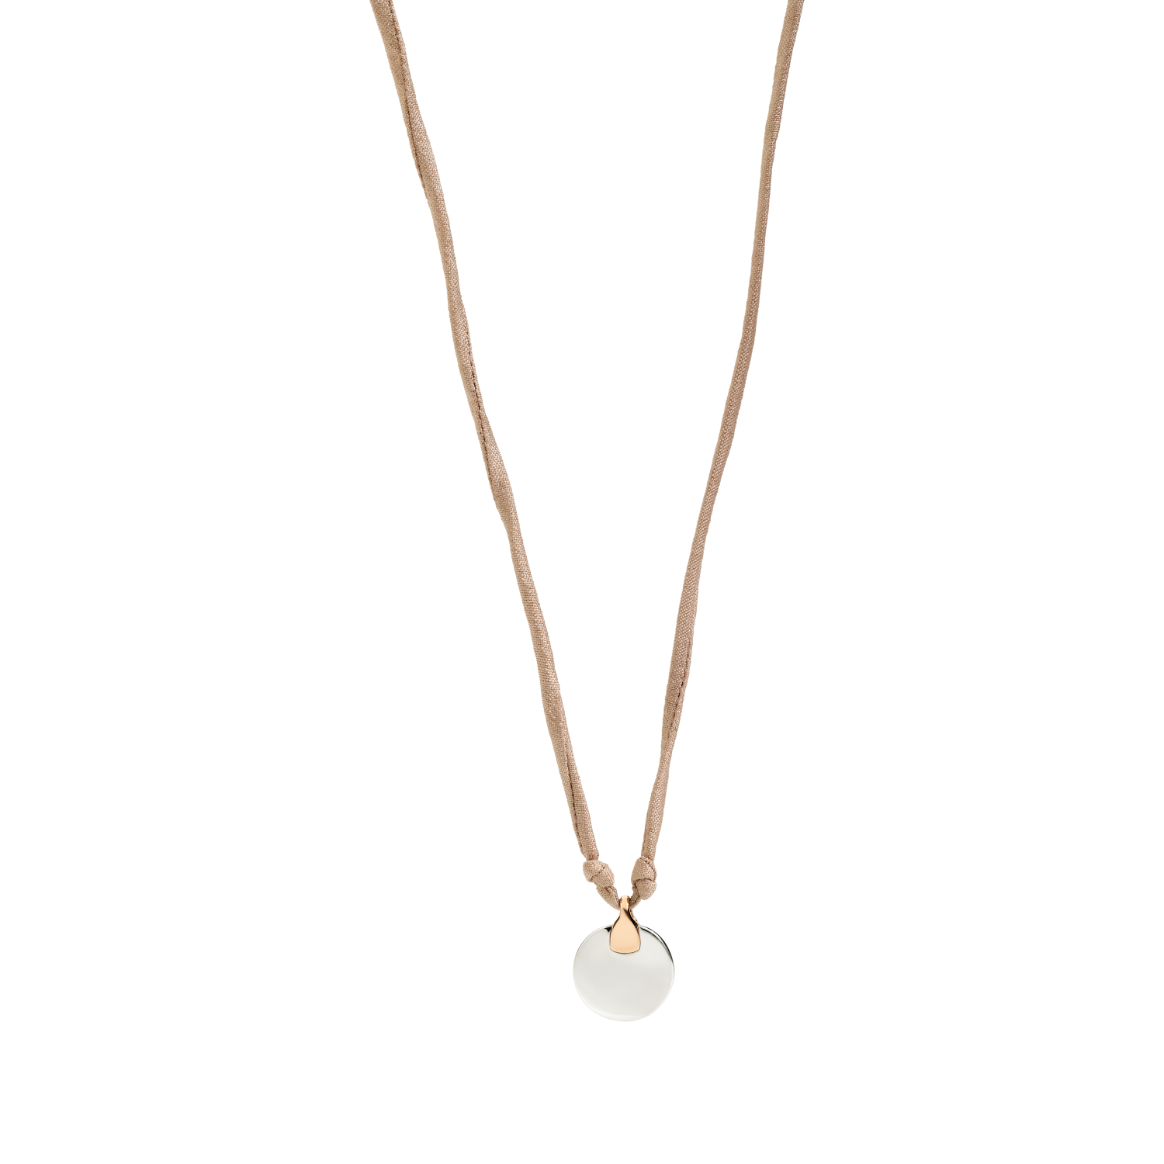 DCC1012_BAZAA_TORAG_010_Dodo_bazaar-necklace-with-ethical-silk-cord-18k-rose-gold-plated-silver-ethical-silk-silver.png